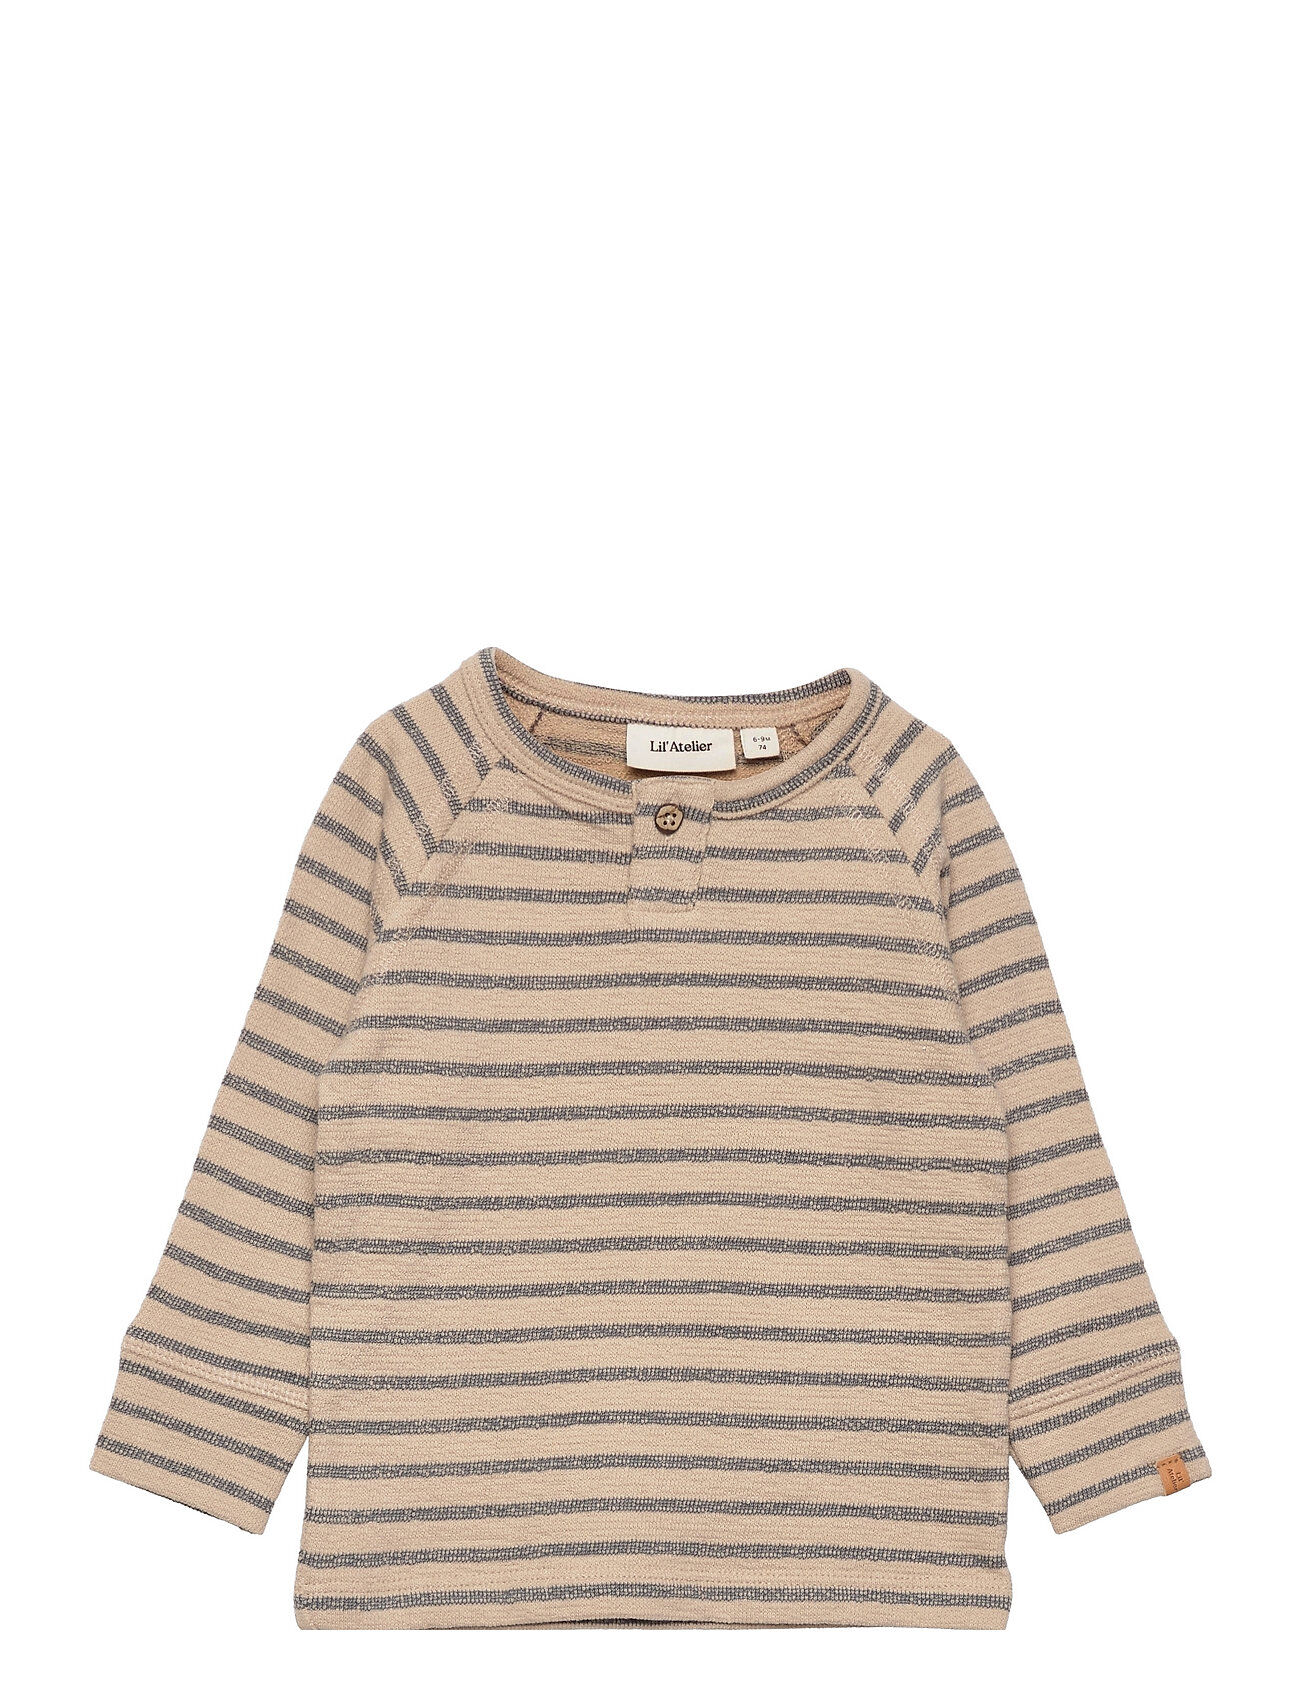 Lil'Atelier Nbmgalfred Ls Top Lil T-shirts Long-sleeved T-shirts Multi/mønstret Lil'Atelier